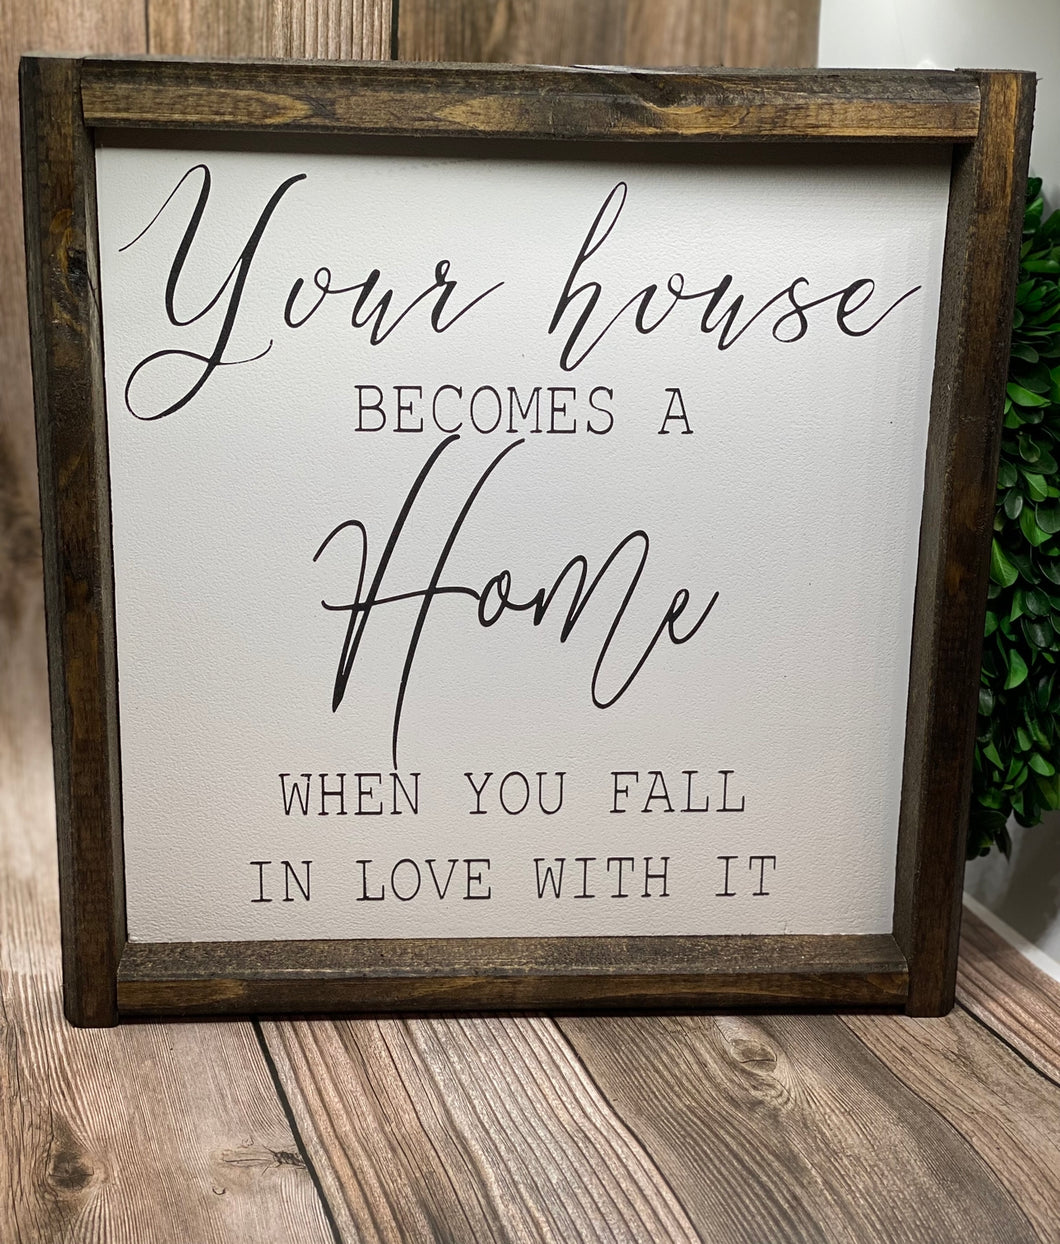 Your house becomes a home when you fall in love with it